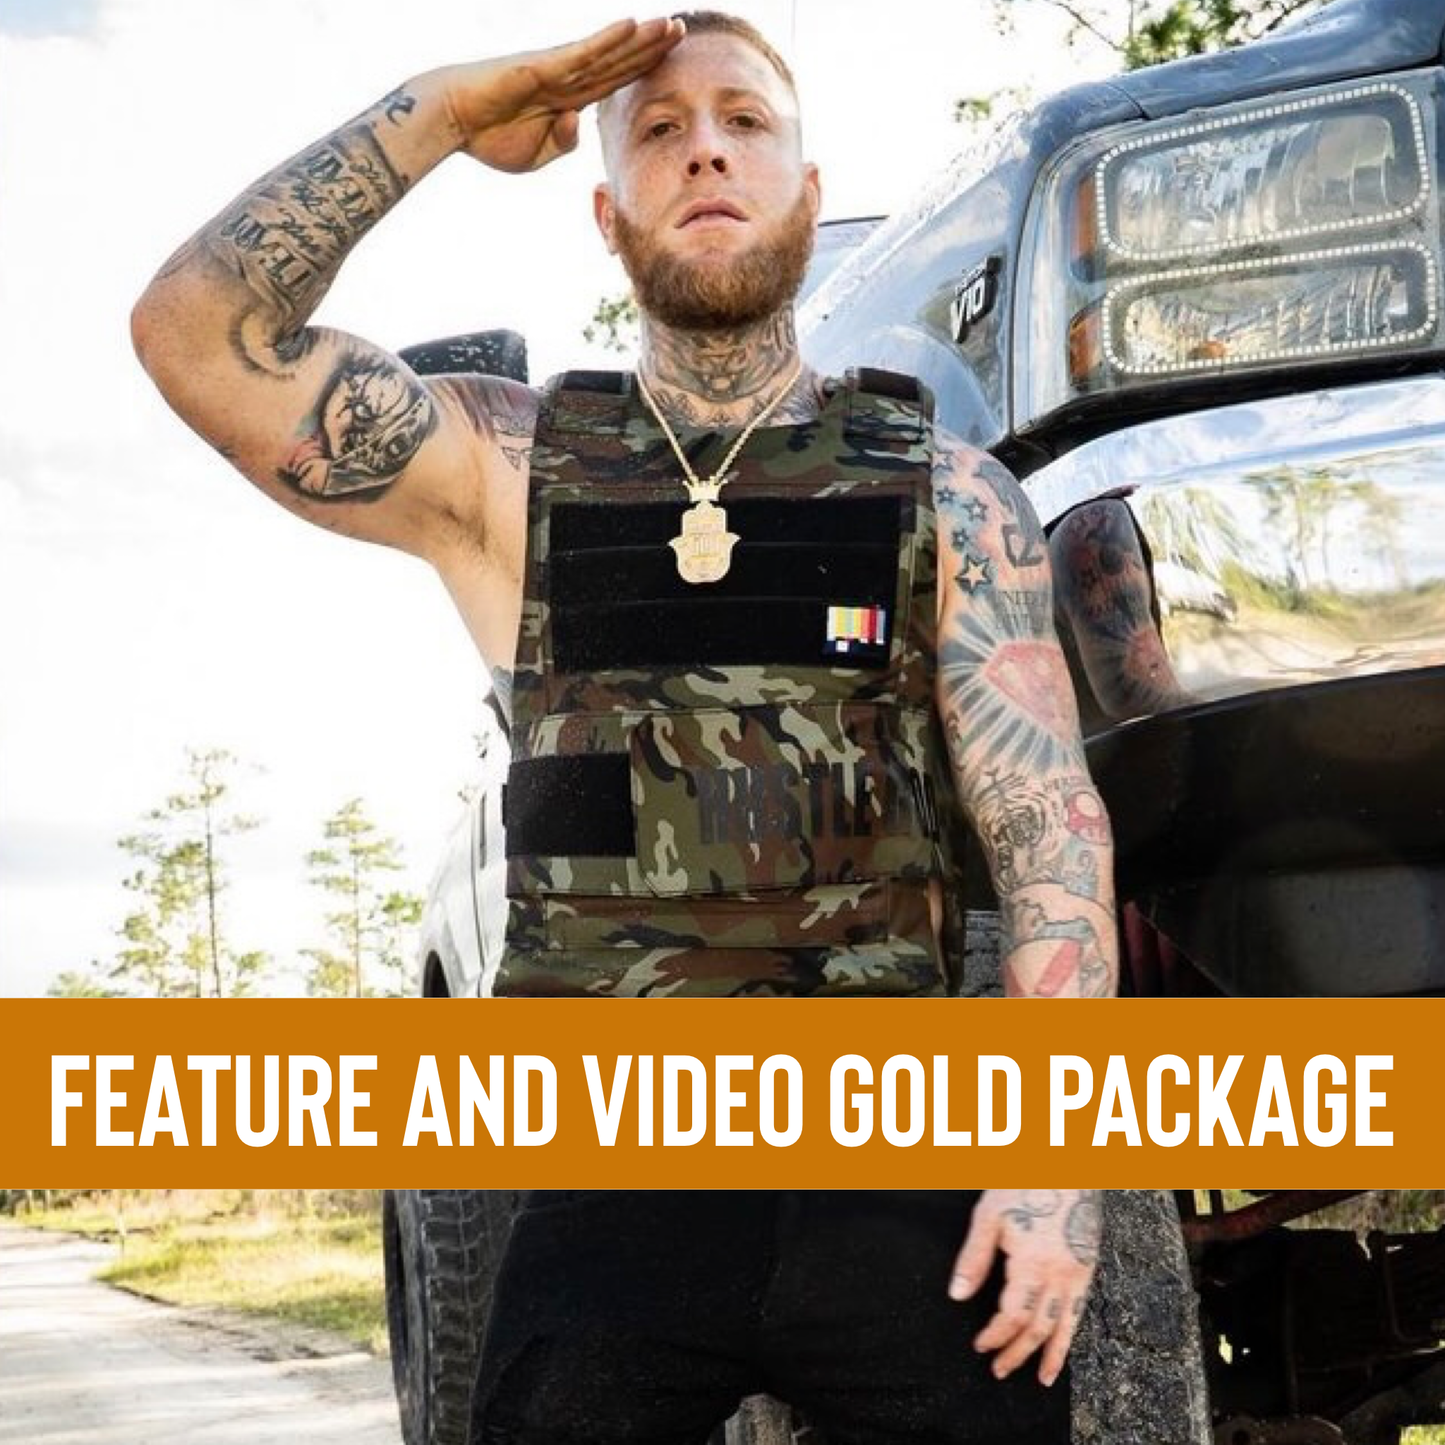 Bezz Believe Feature, Video And Promo Gold Package